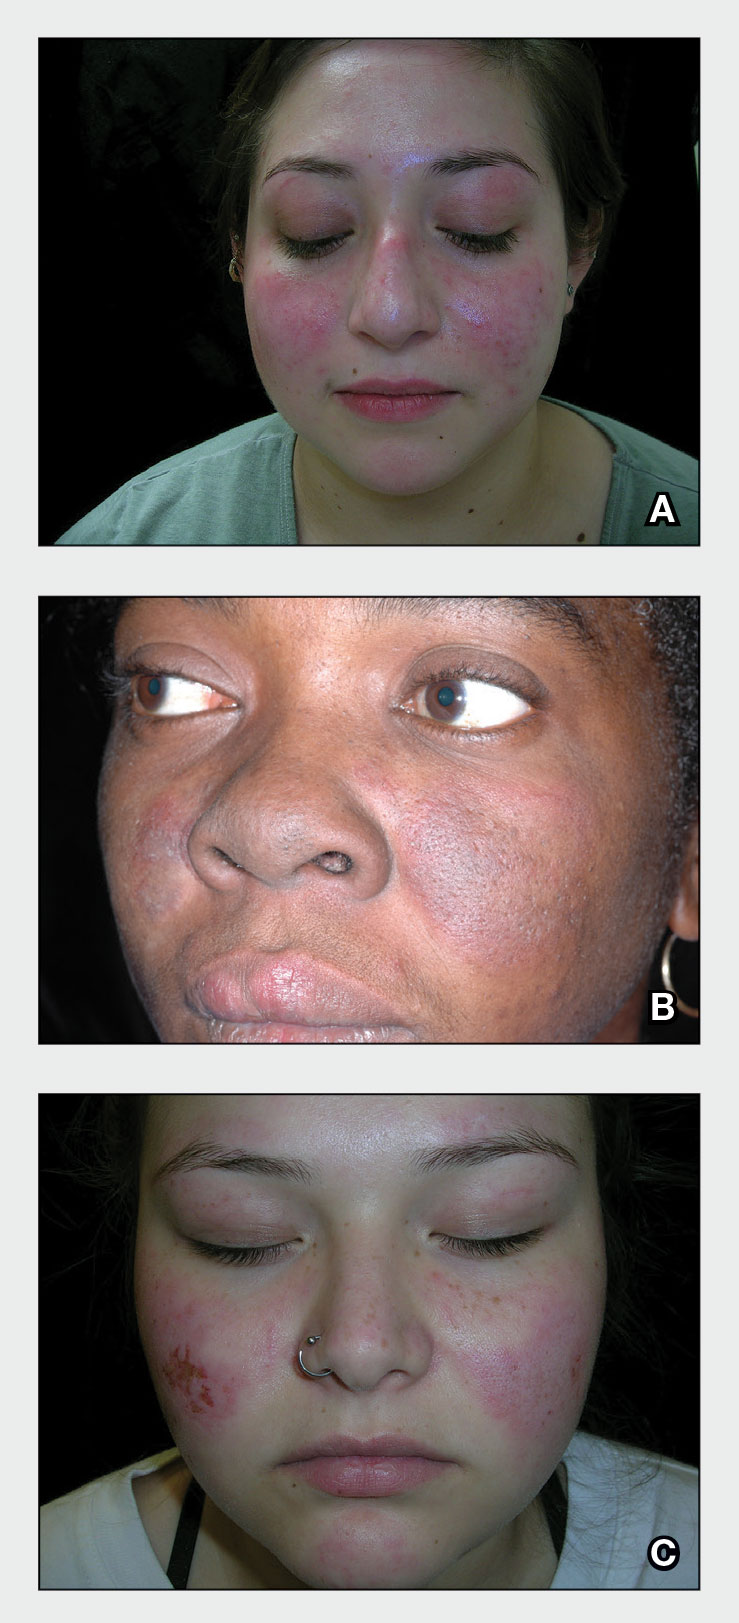 A 23-year-old White woman with malar erythema from acute cutaneous lupus erythematosus. The erythema also can be seen on the nose and eyelids but spares the nasolabial folds.